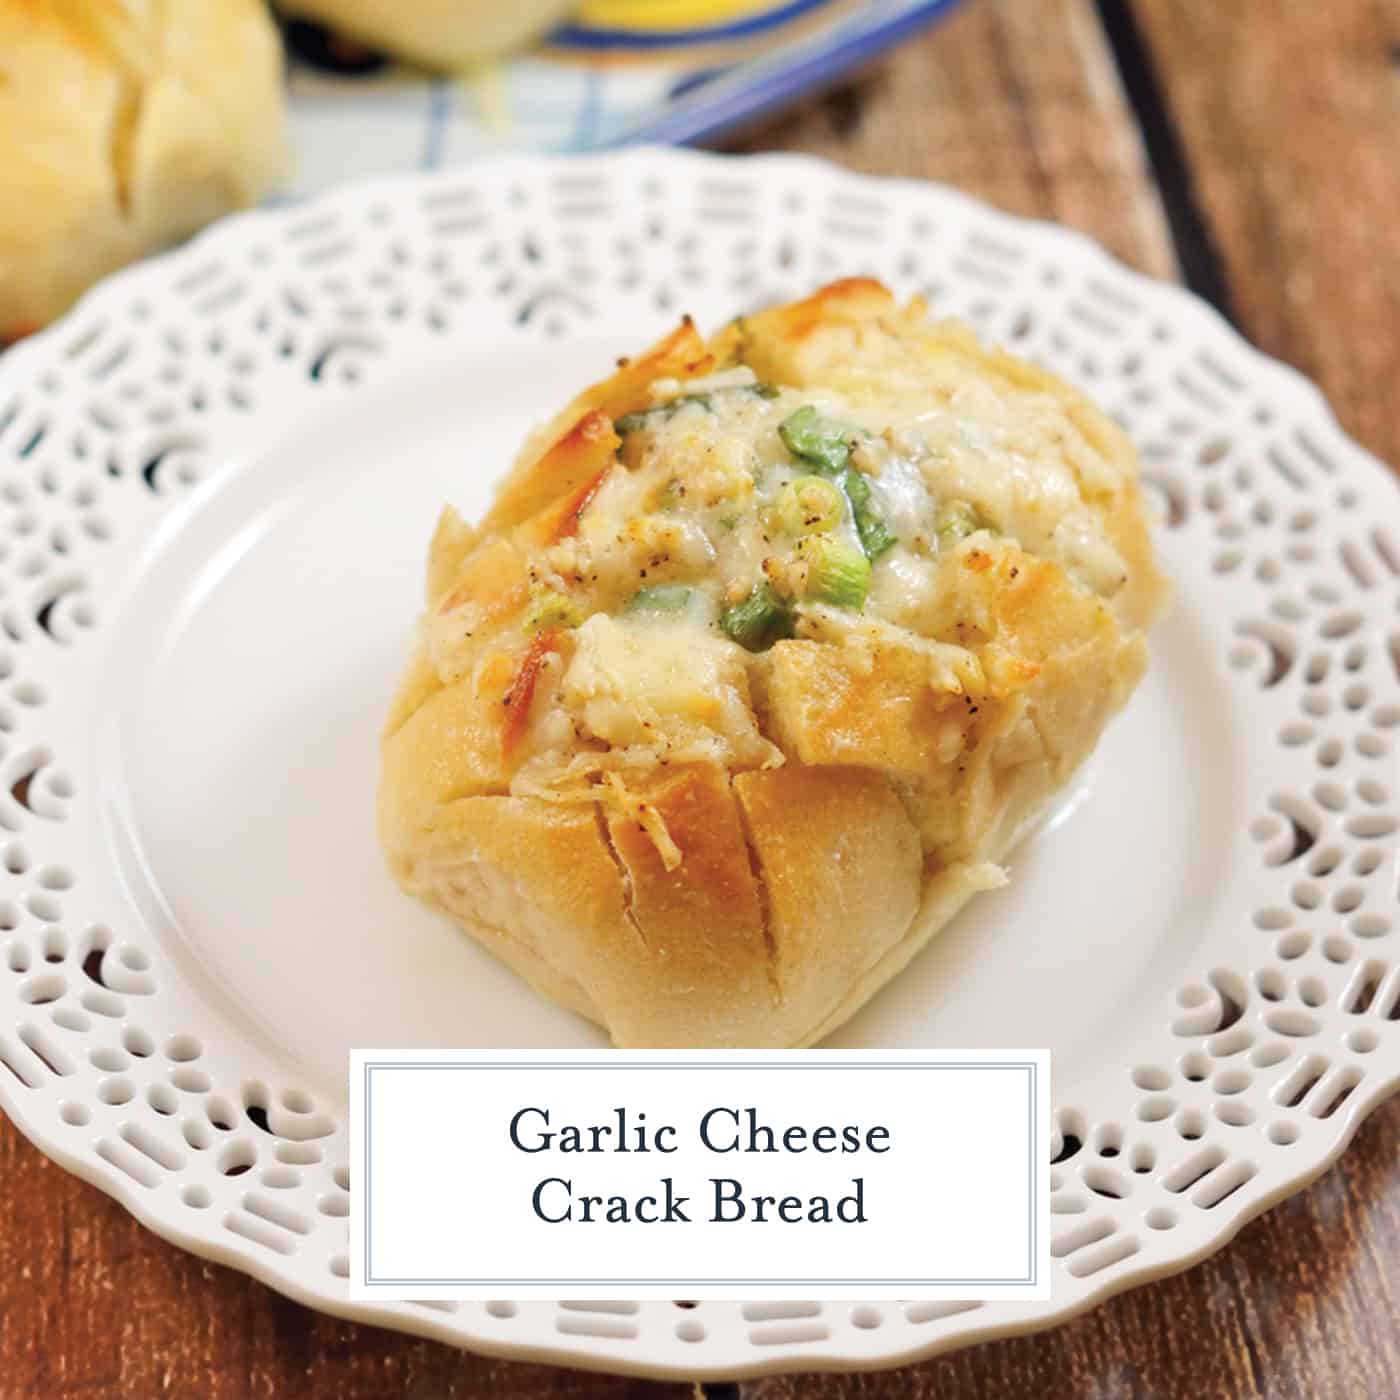 Individual Garlic Cheese Crack Bread is bread cut in a crisscross pattern, stuffed with cheese, drenched in  garlic butter and baked to golden perfection. #garlicbread #crackbread www.savoryexperiments.com 